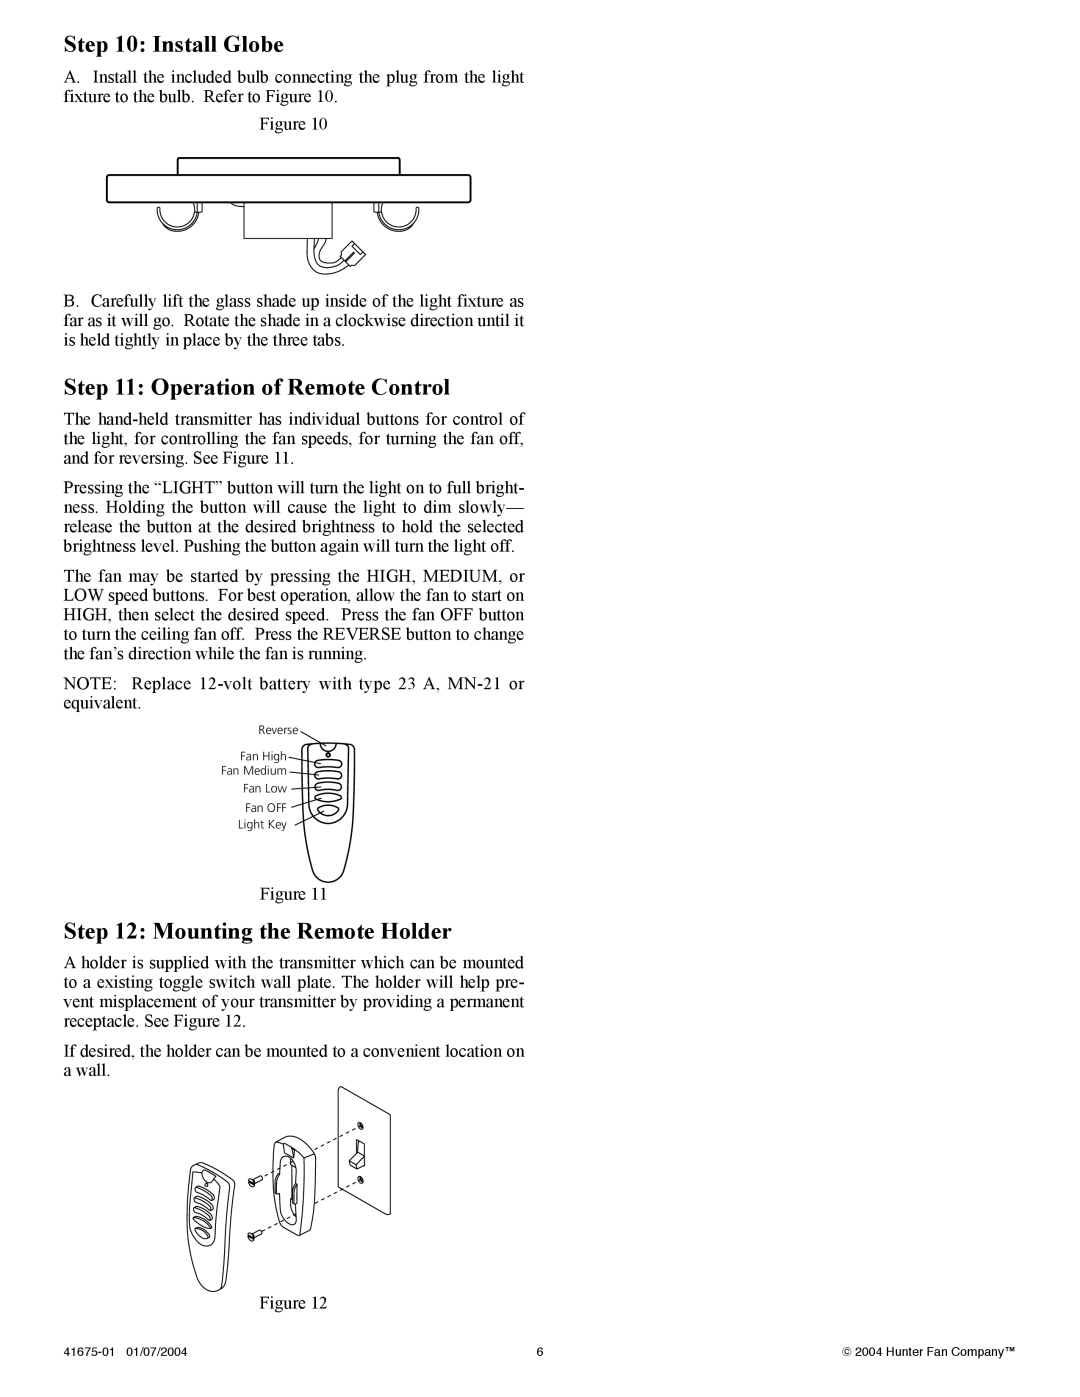 Hunter Fan 41675-01 installation instructions Install Globe, Operation of Remote Control, Mounting the Remote Holder 